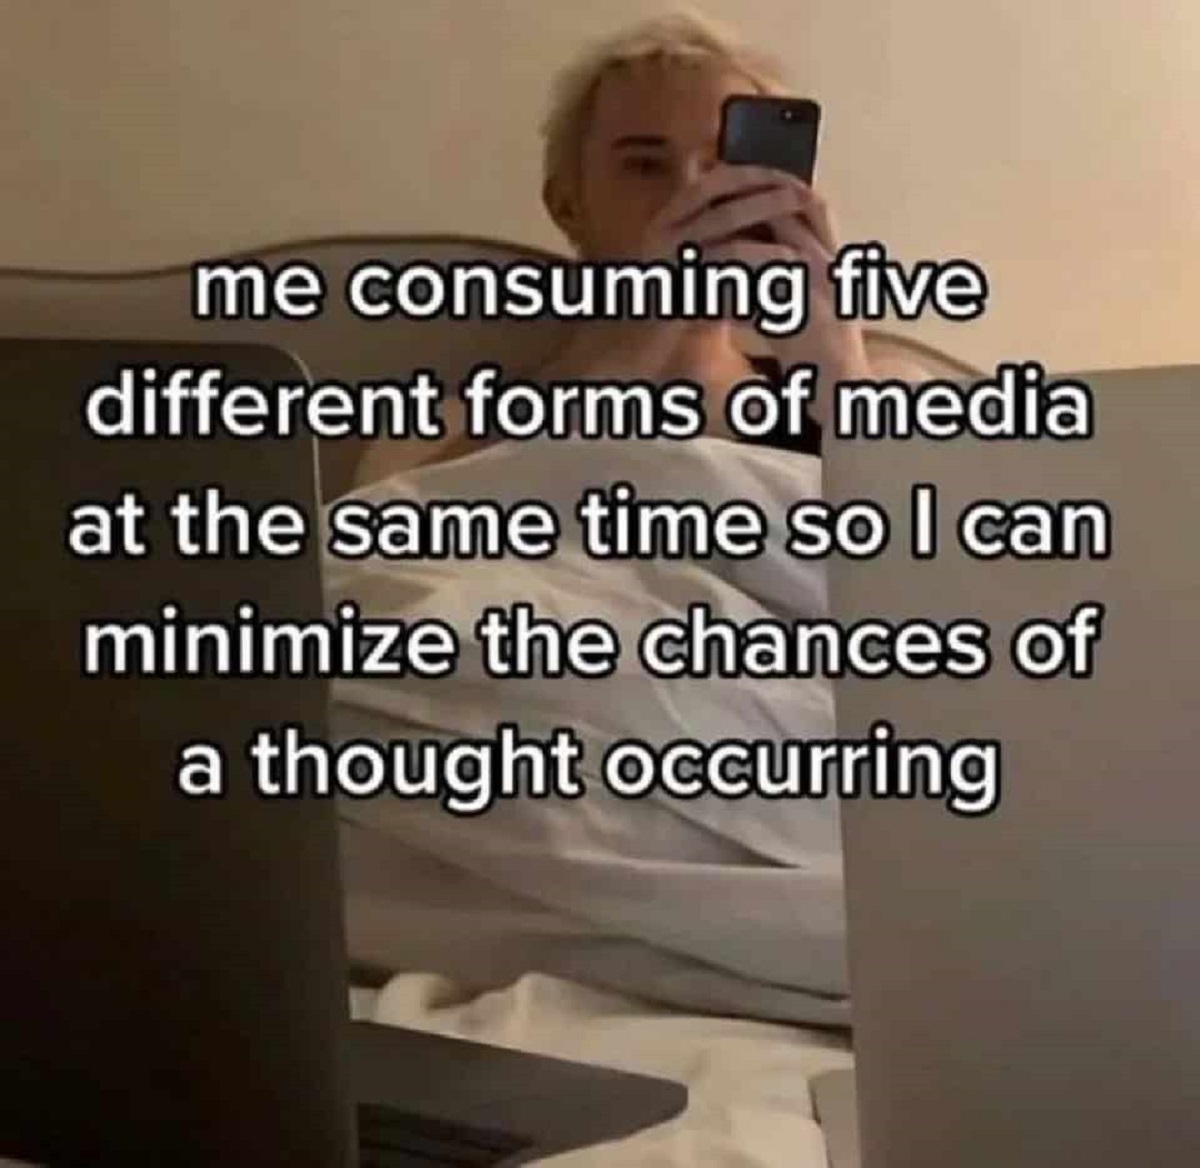 no chance of a thought occurring - me consuming five different forms of media at the same time so I can minimize the chances of a thought occurring